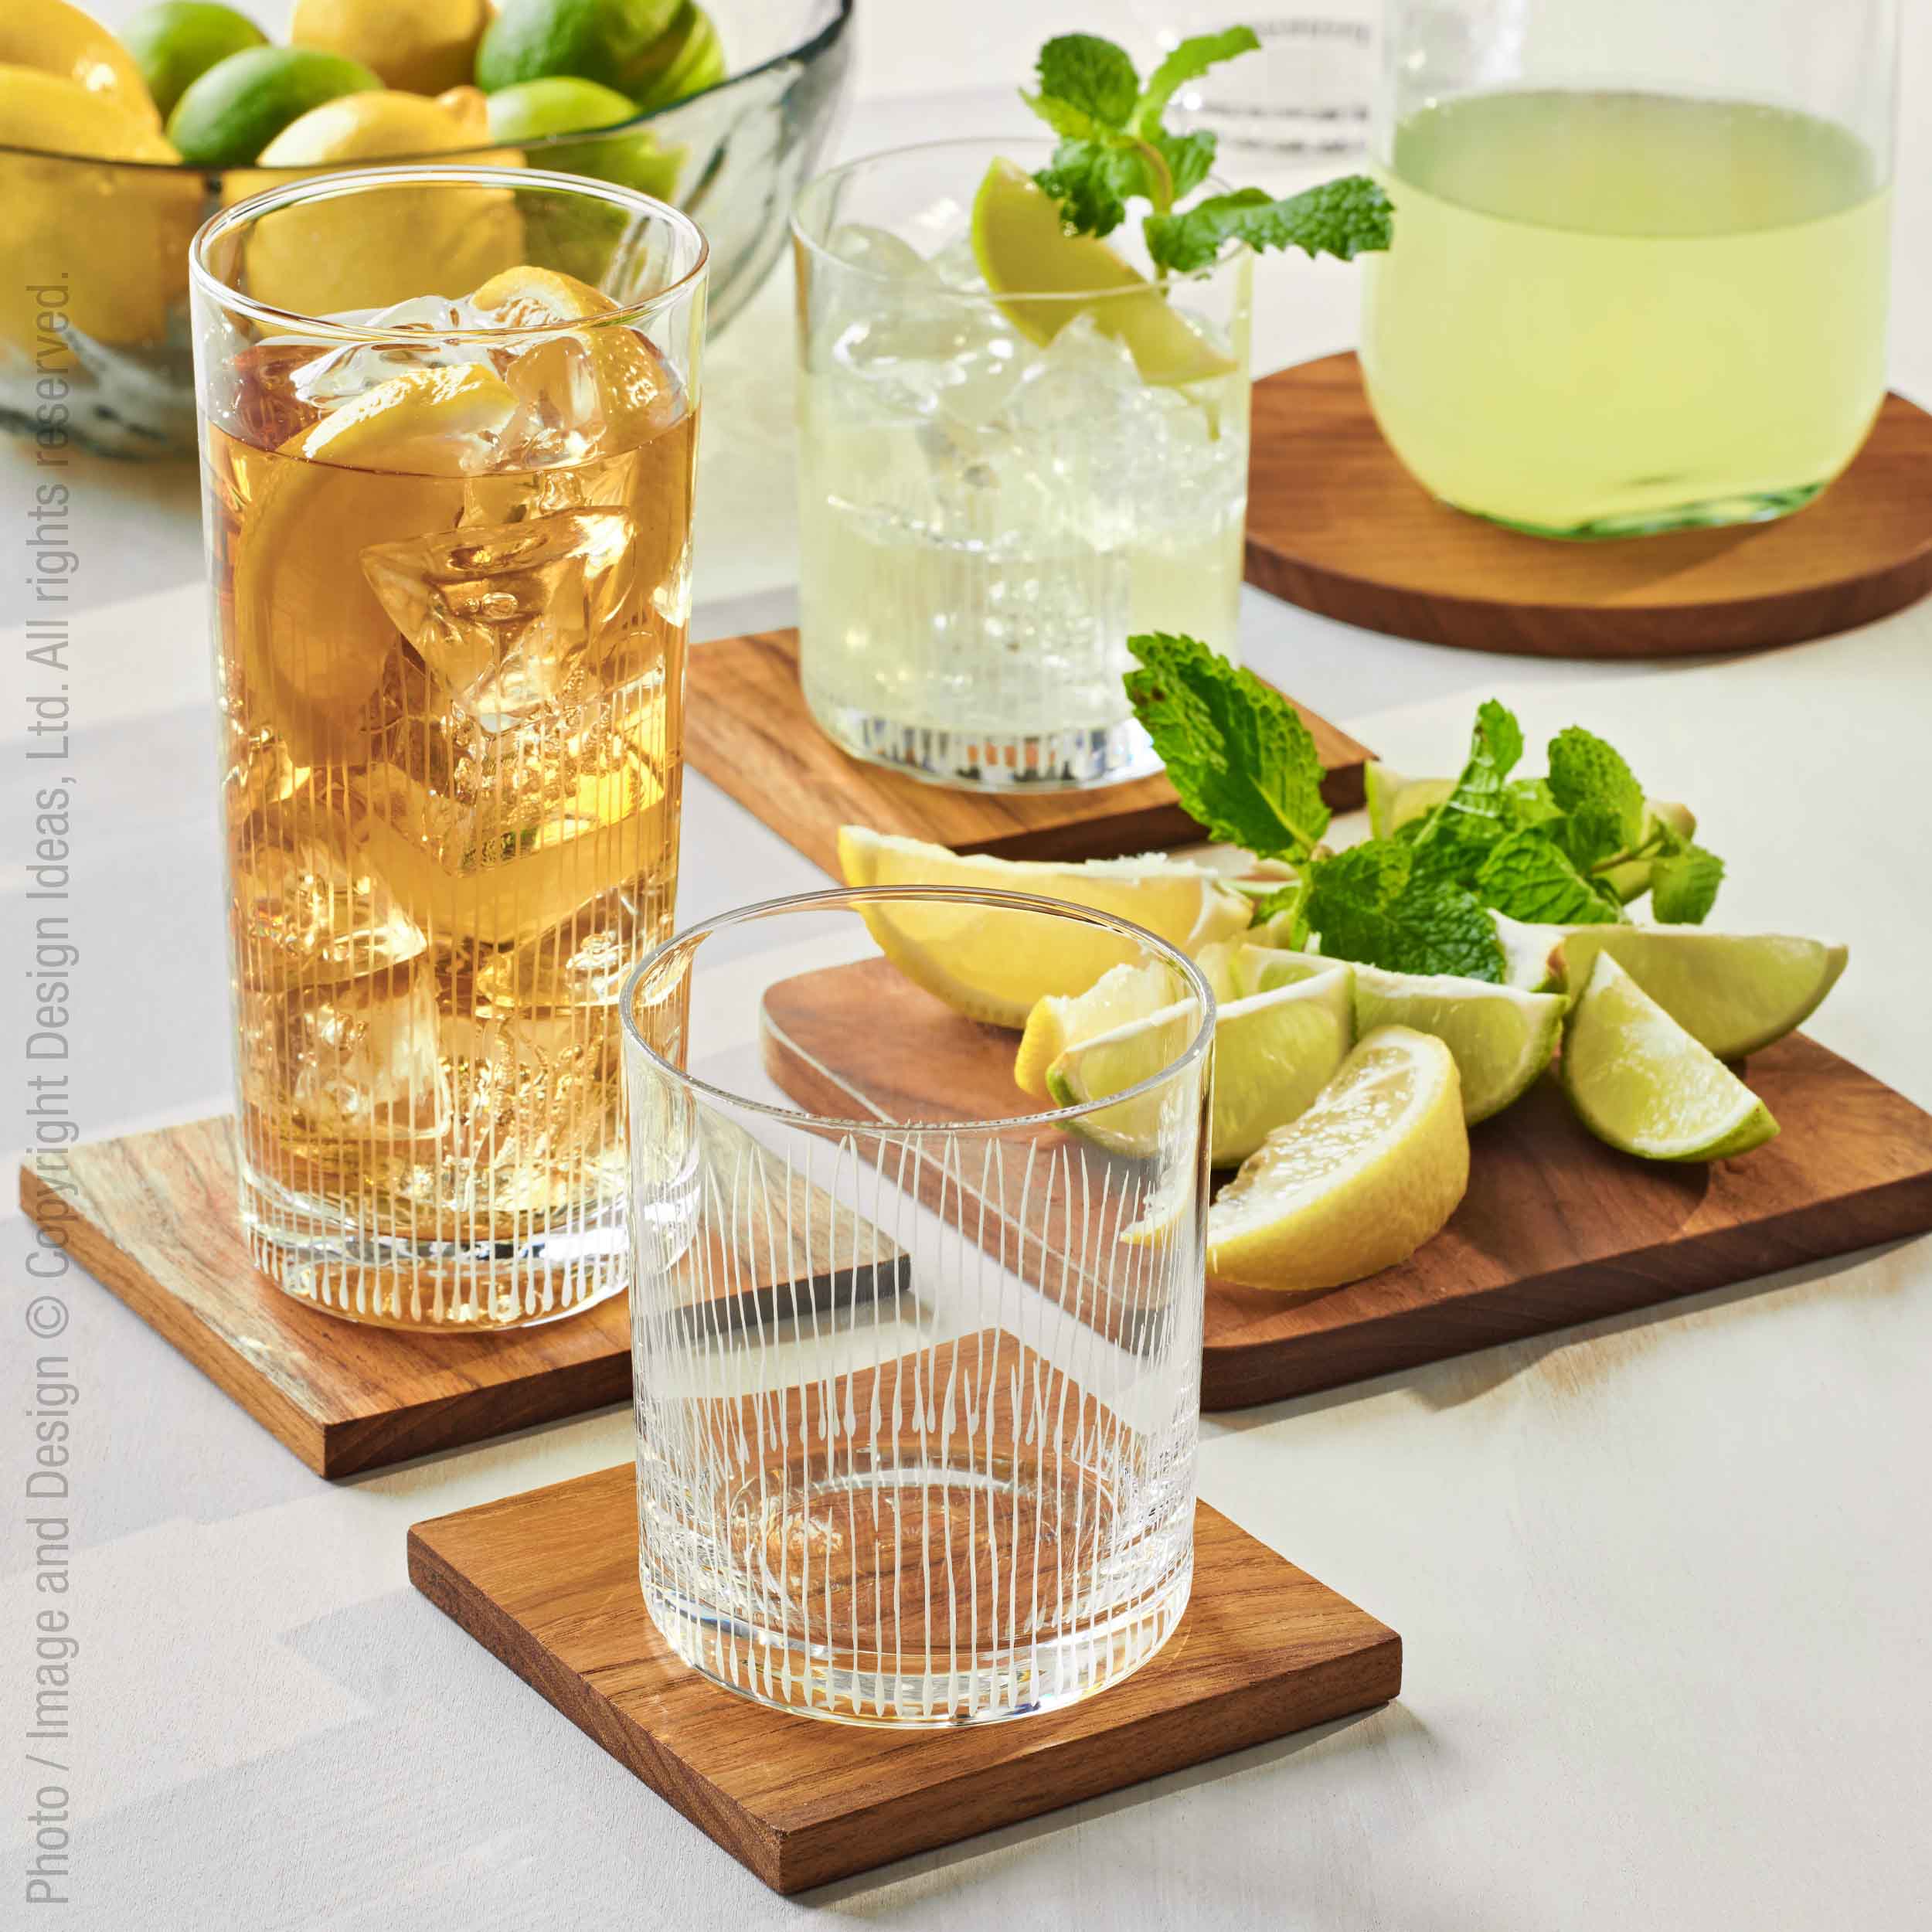 Endra™ drinking glass (16 oz.) - Clear | Image 3 | Premium Glass from the Endra collection | made with Glass for long lasting use | texxture